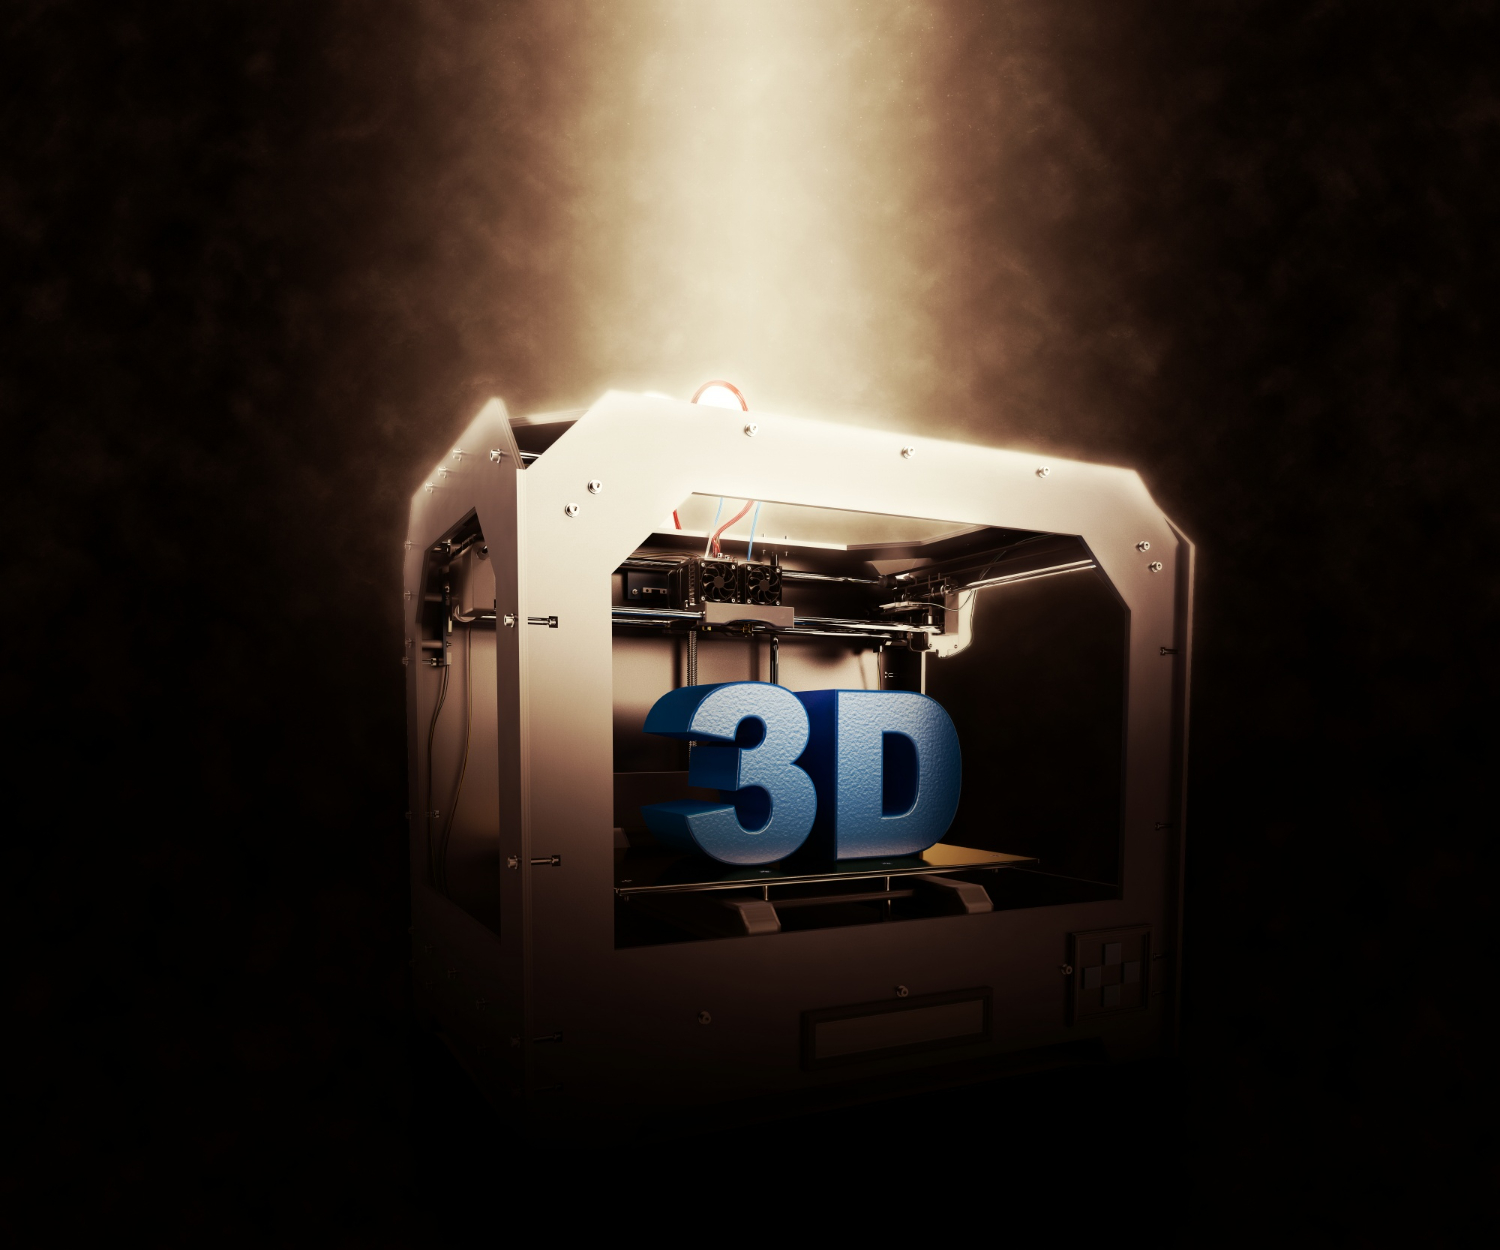 Can Your 3D Printer Be Hacked?